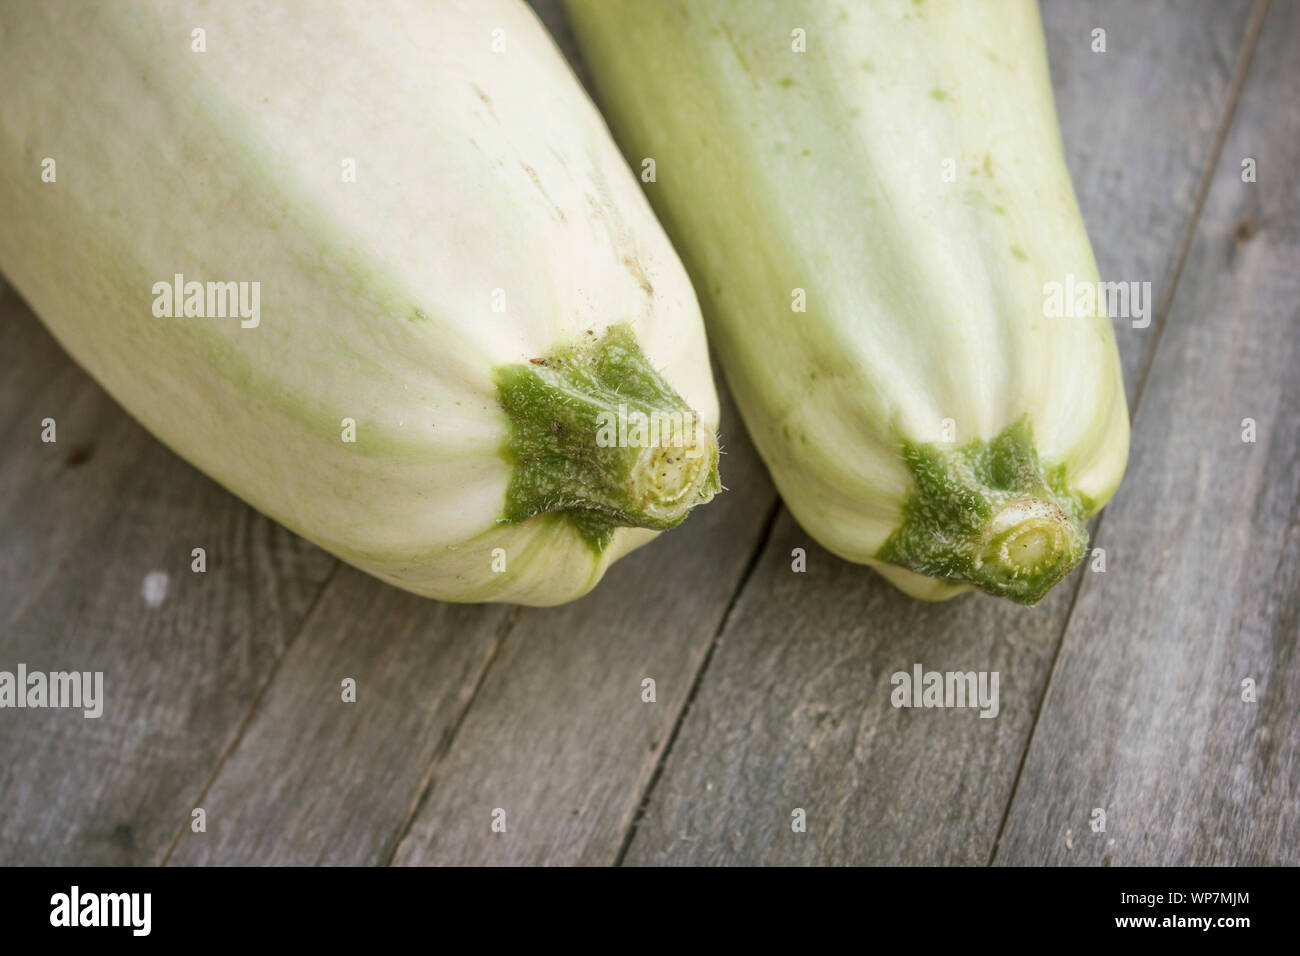 Two ripe zucchini on a floor from old boards close-up Stock Photo